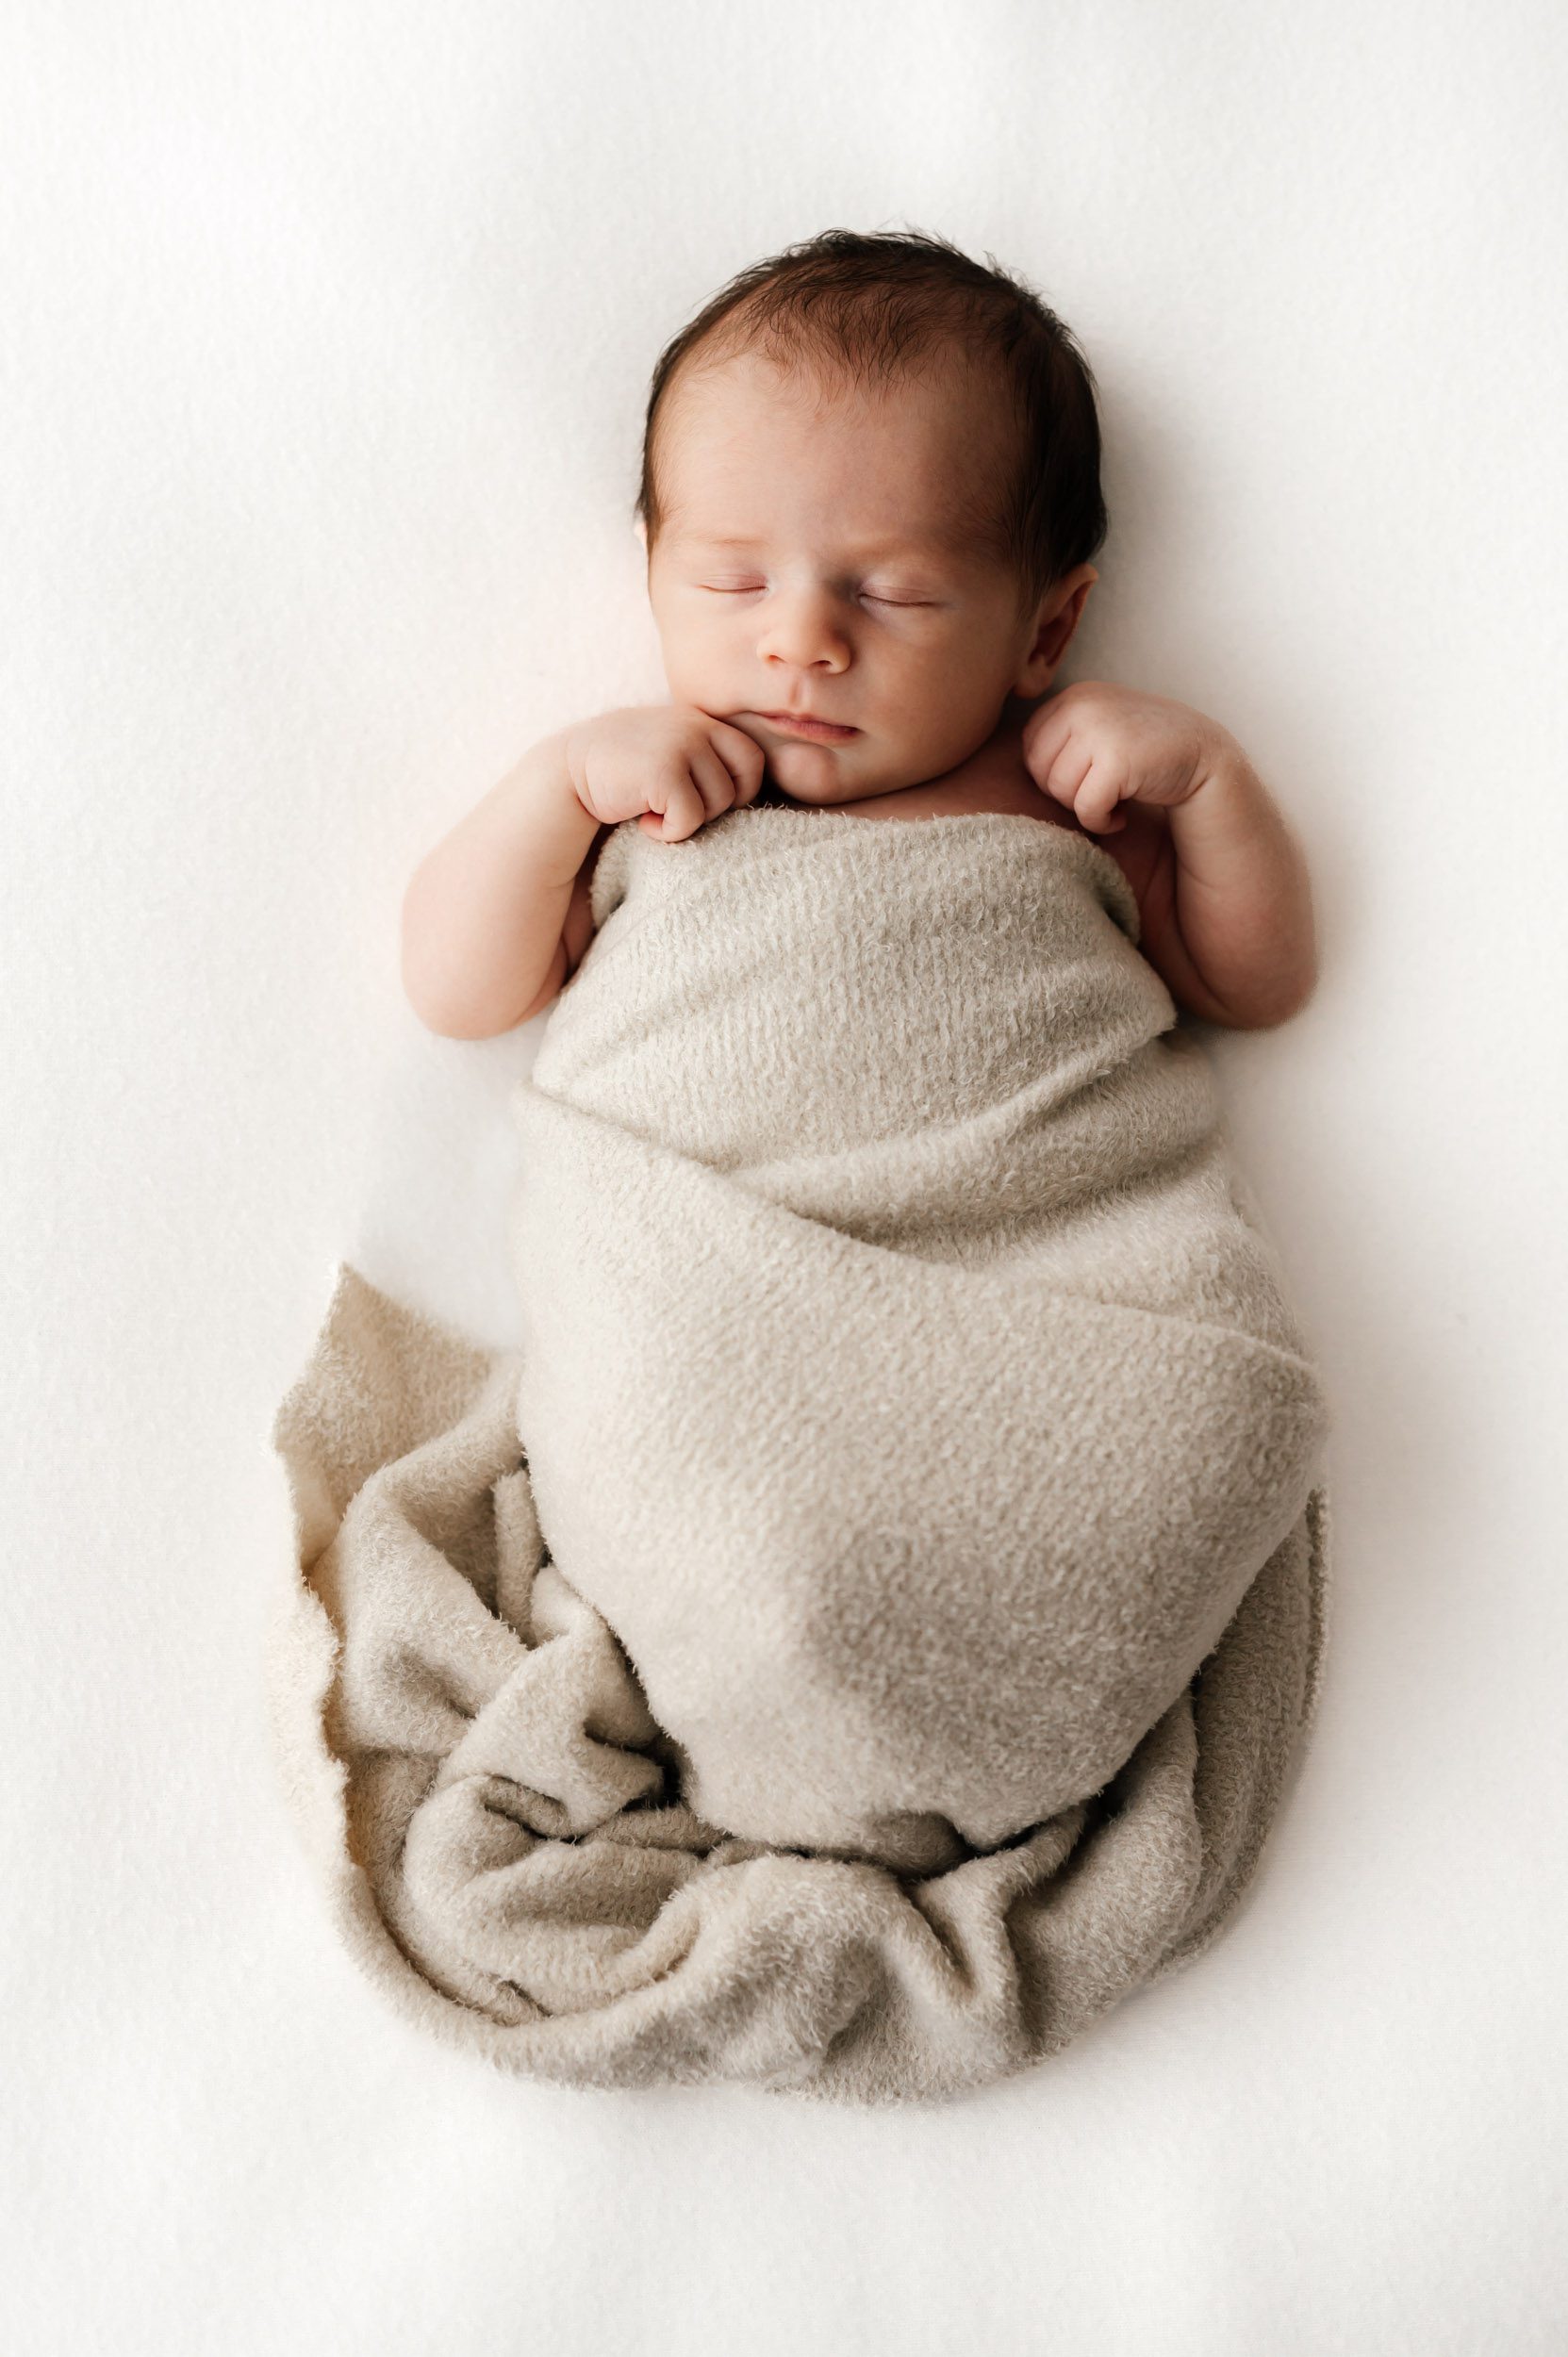 a baby boy wrapped in a beige swaddle sleeping on his back on a white backdrop during a newborn photoshoot